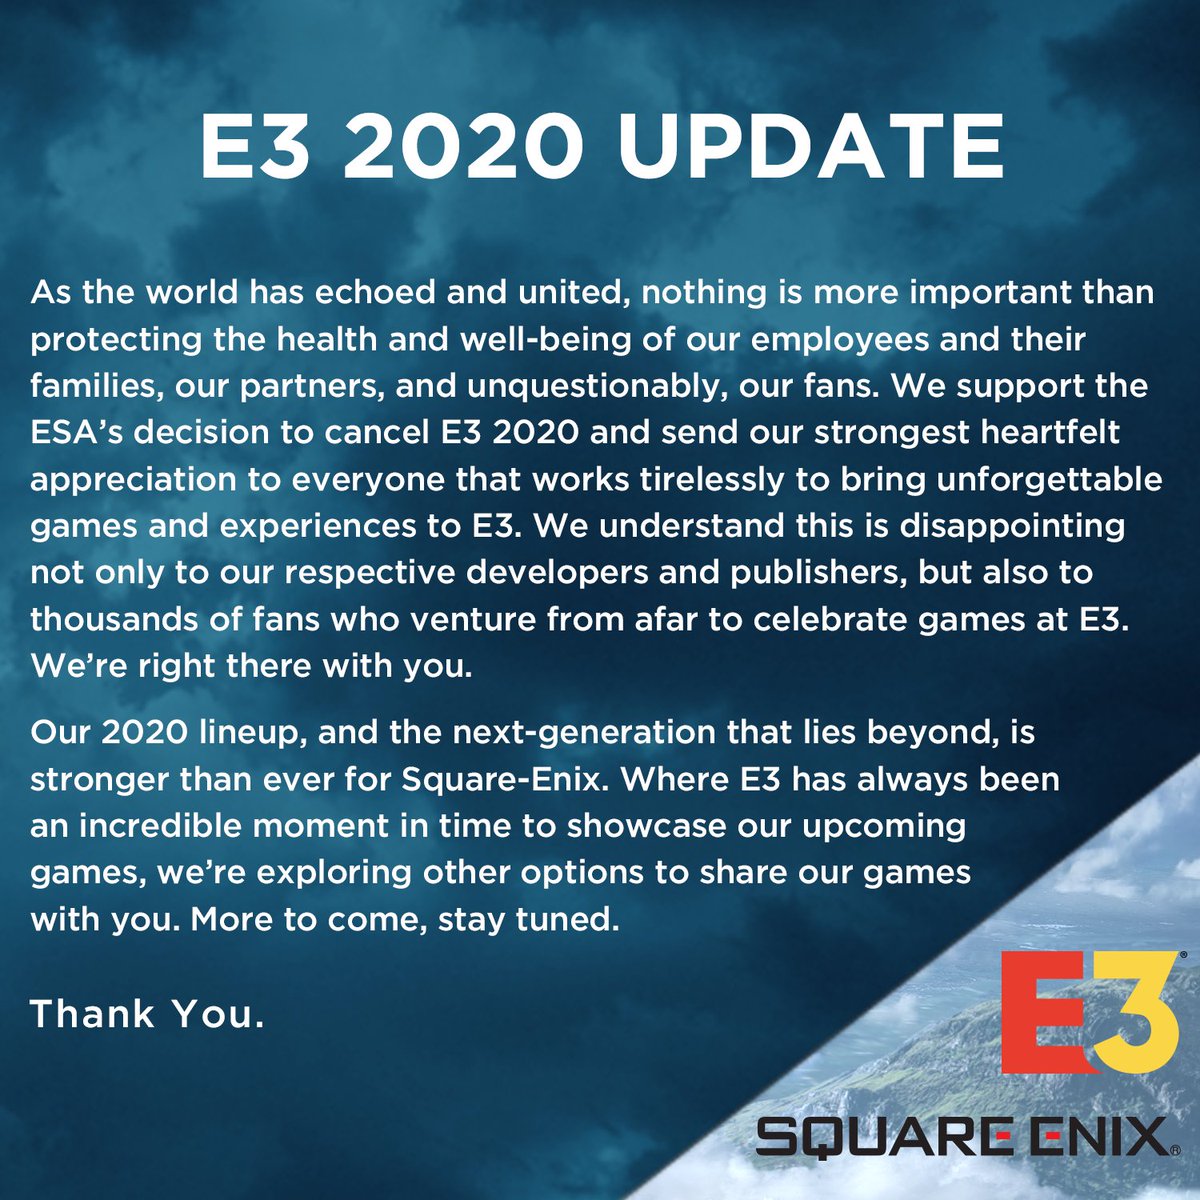 Square Enix on Twitter: "An important E3 2020 update from us… "